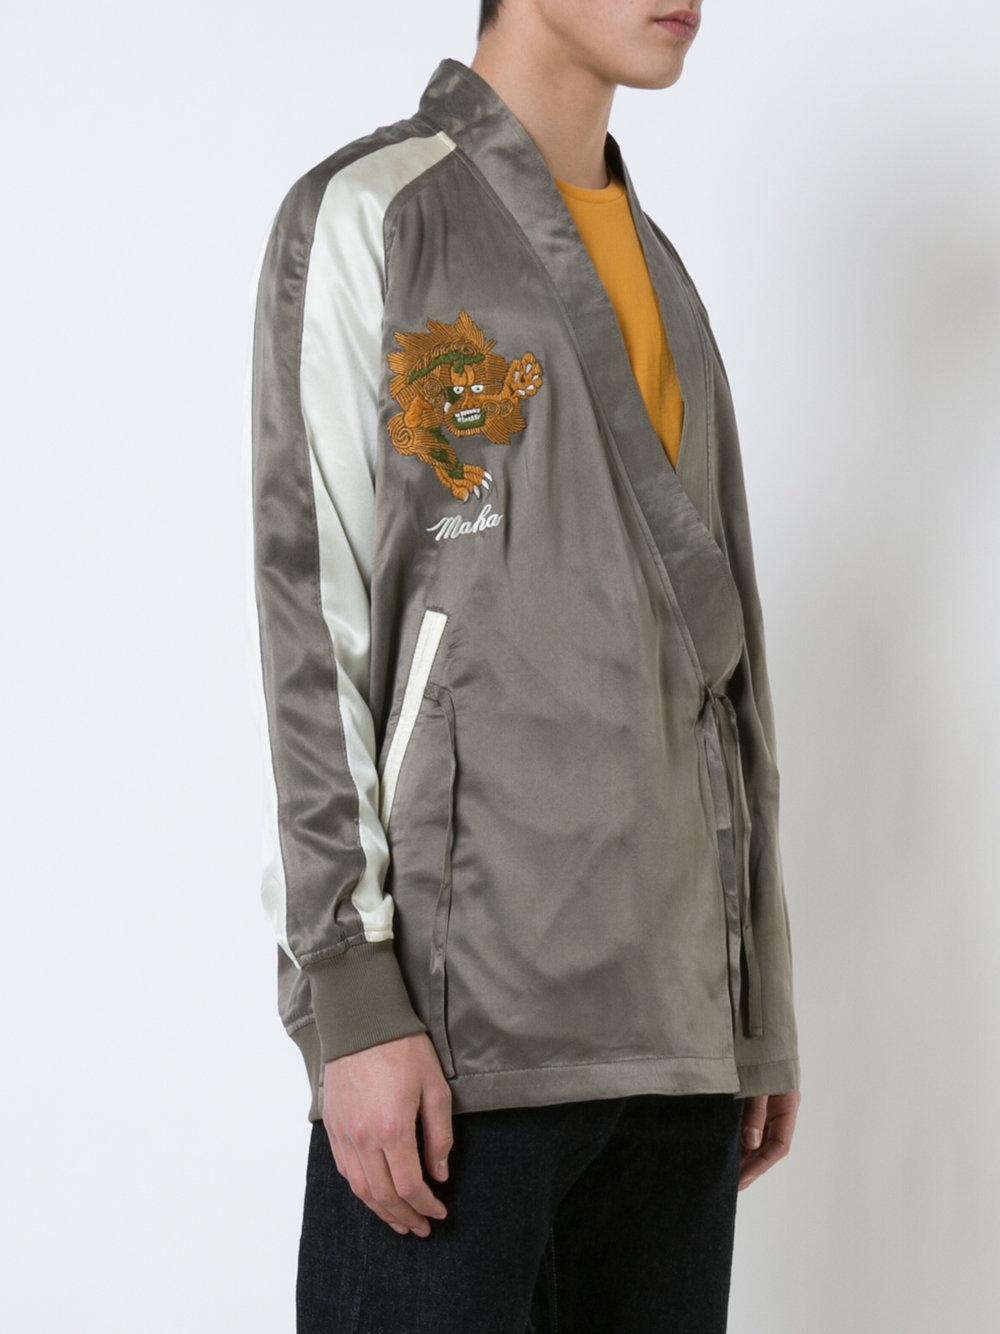 Maharishi Silk Tiger Embroidered Jacket in Green for Men - Lyst